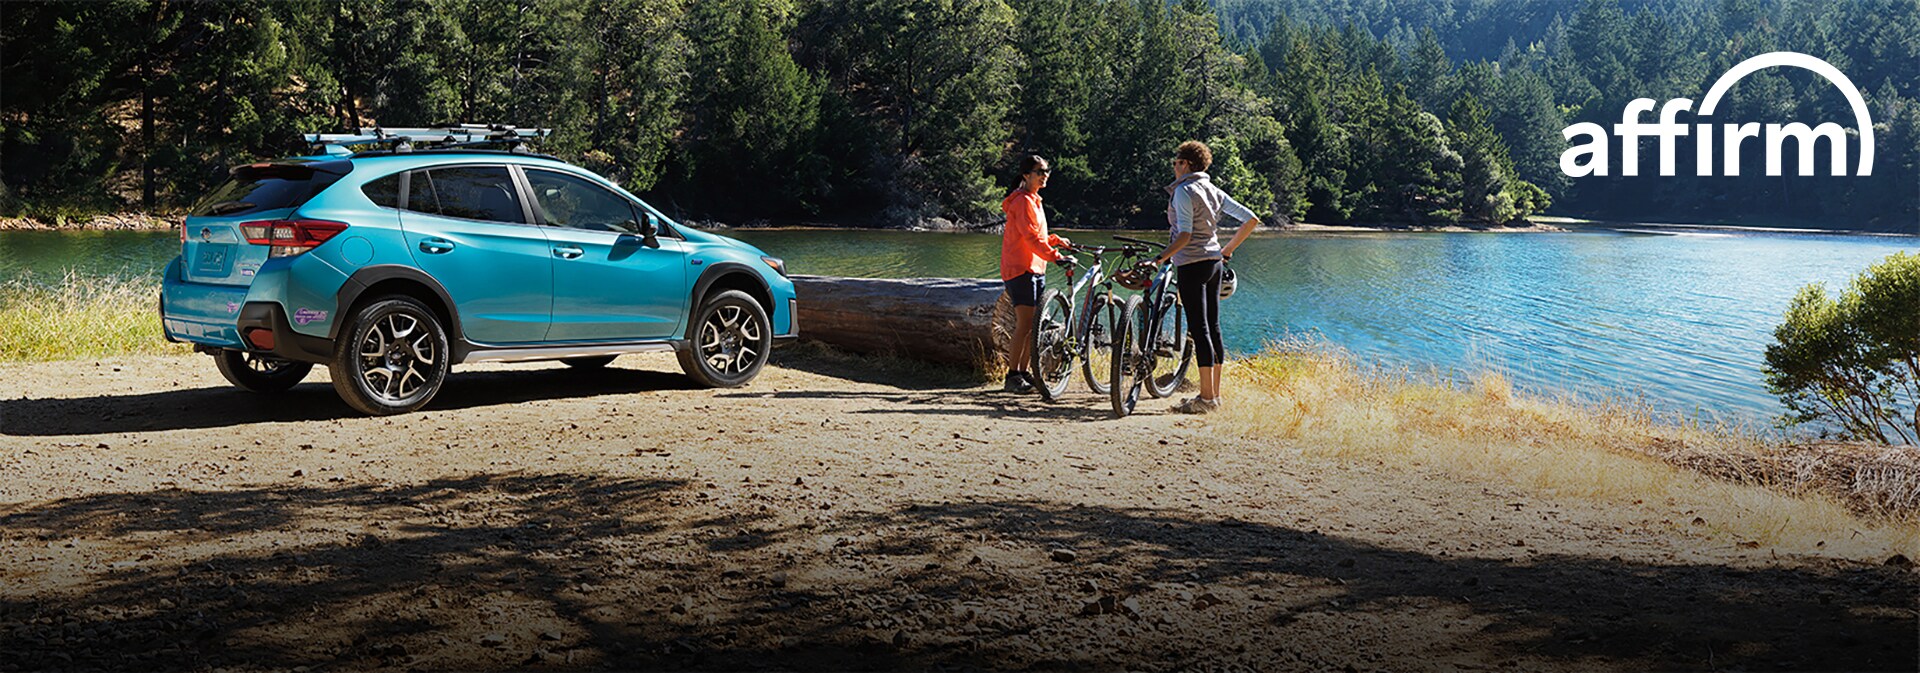 Subaru parked by a lake with roof bike rack. Two people with bikes nearby. Affirm logo.